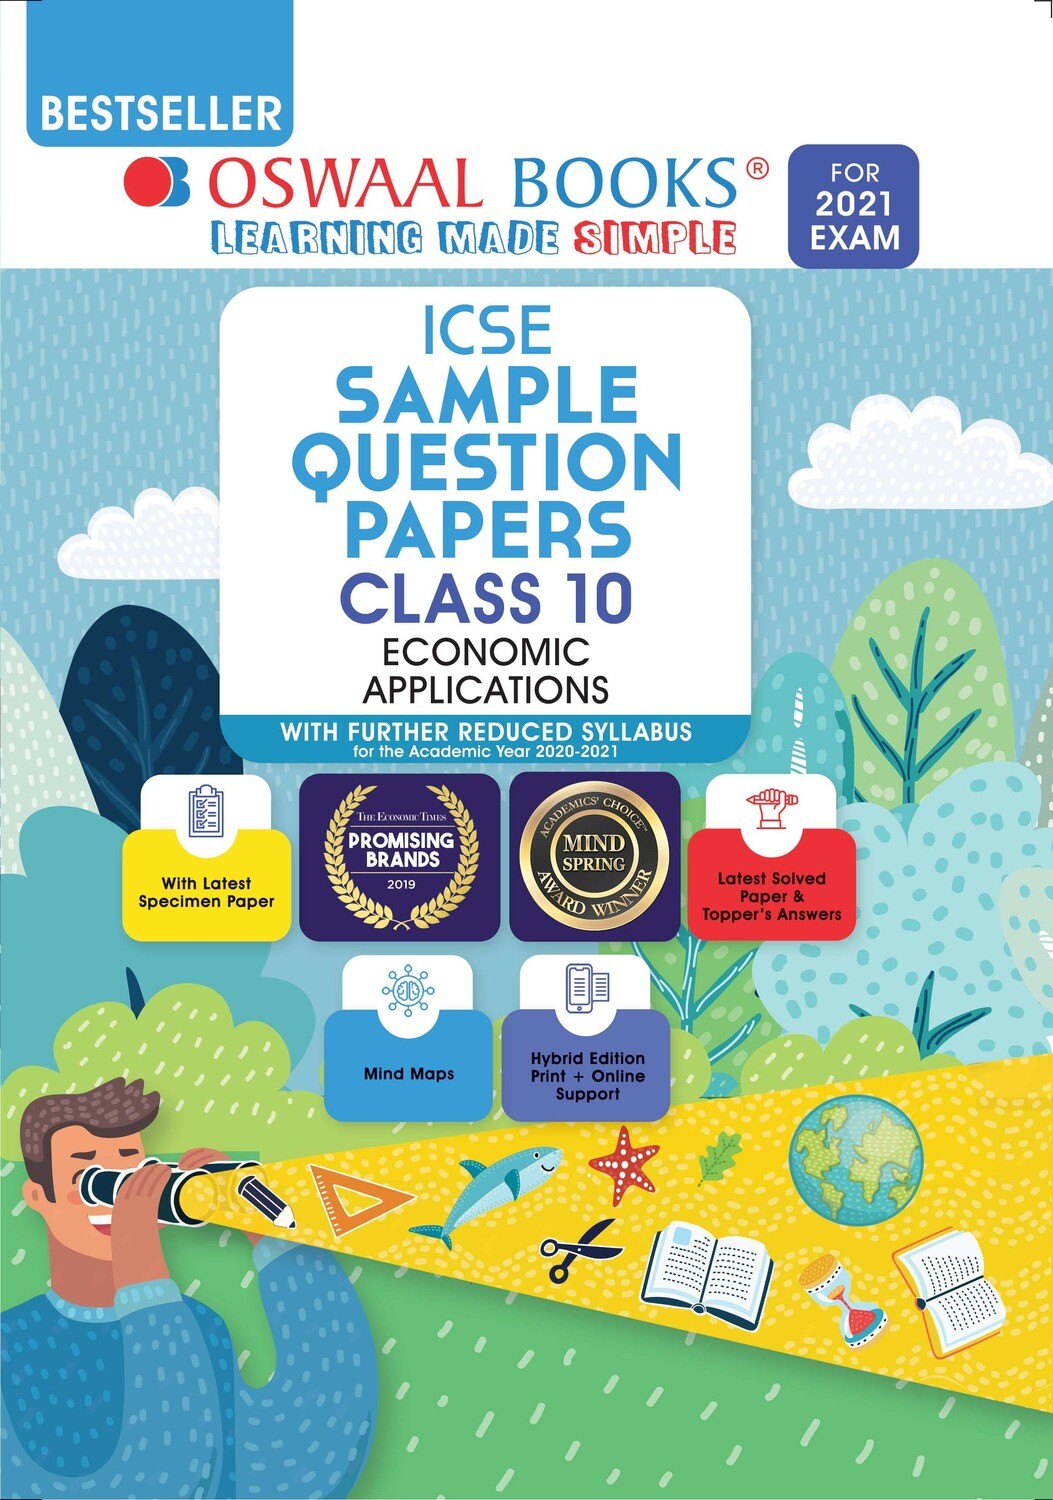 Buy e-book: Oswaal ICSE Sample Question Papers Class 10 Economic Applications (Reduced Syllabus for 2021 Exam)